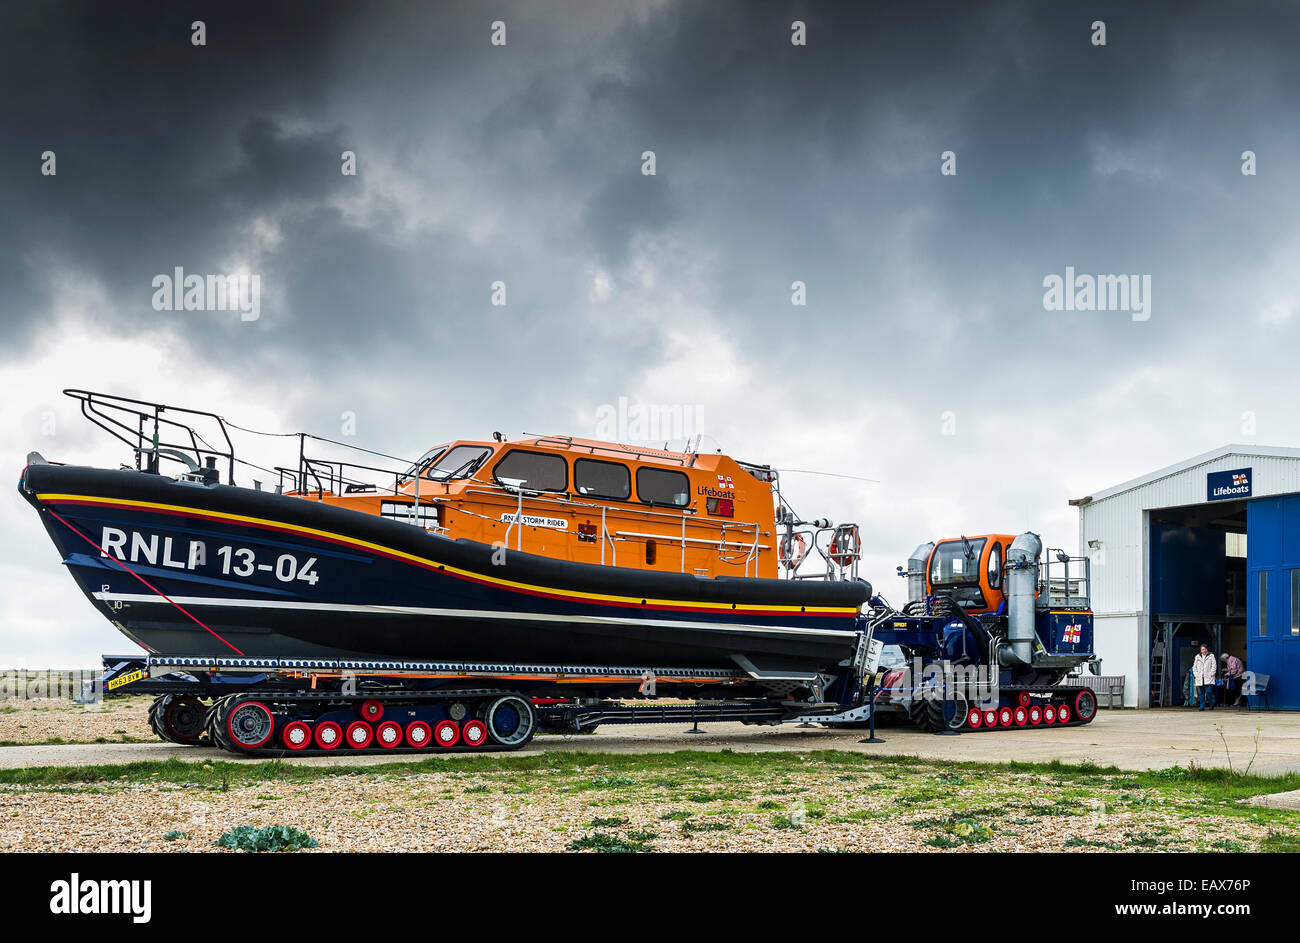 The relief Shannon class Lifeboat 'Storm rider' on a trailer ready to be launched at Dungeness in Kent. Stock Photo